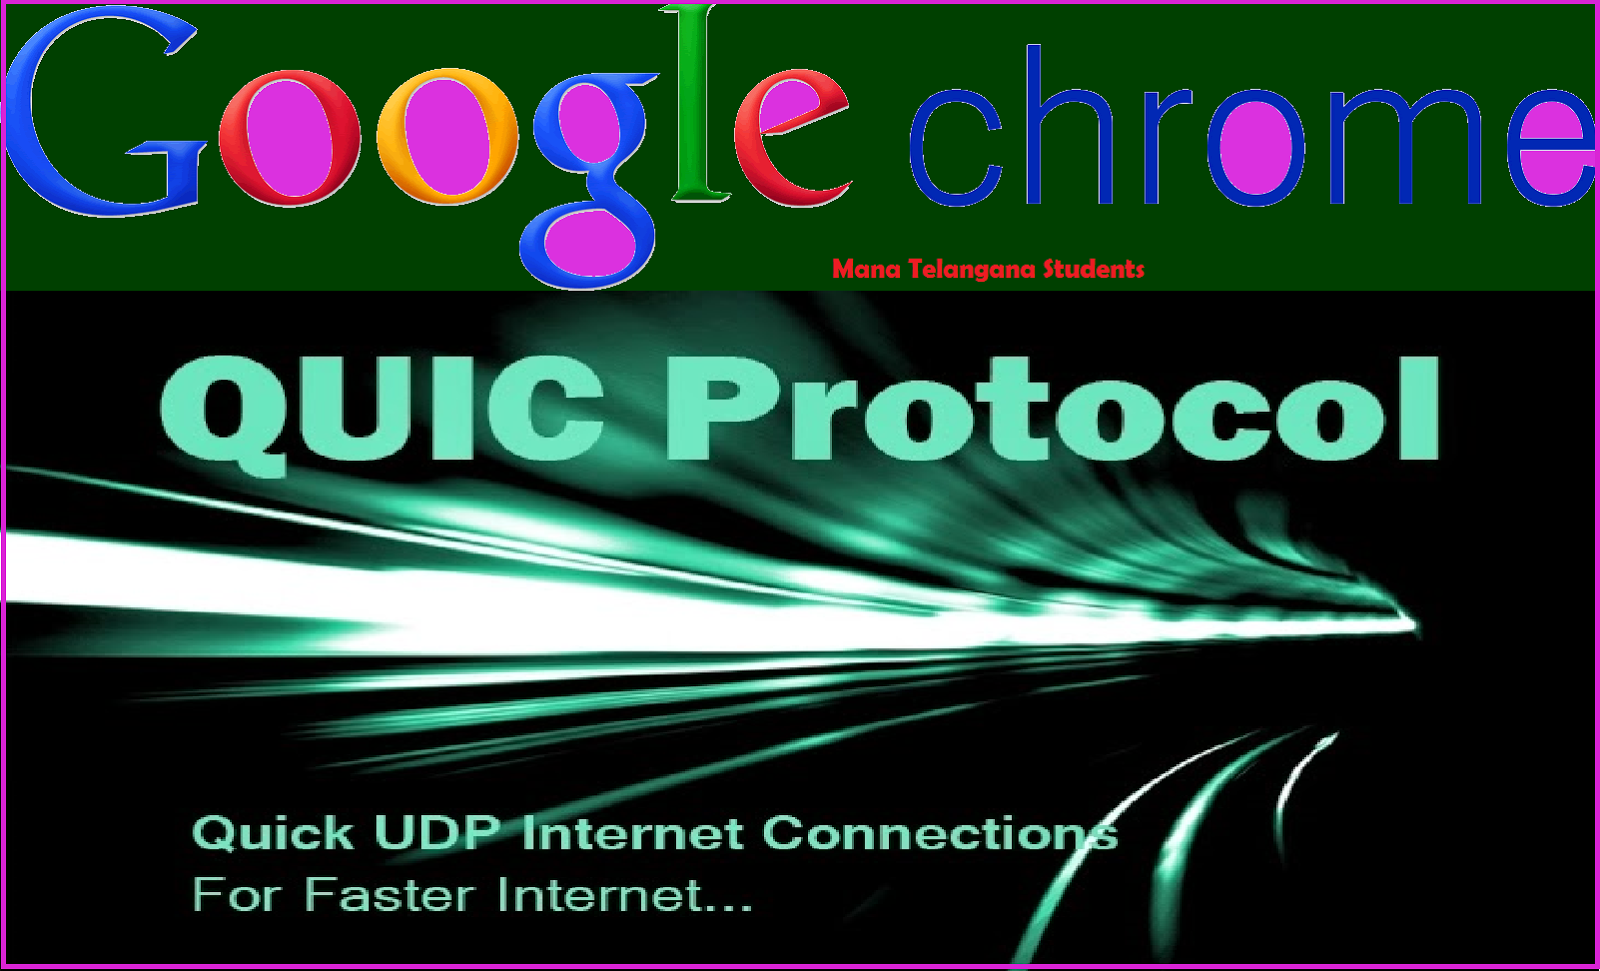 Did You Know: Google is trying every effort to make the World Wide Web faster with QUIC Protocal